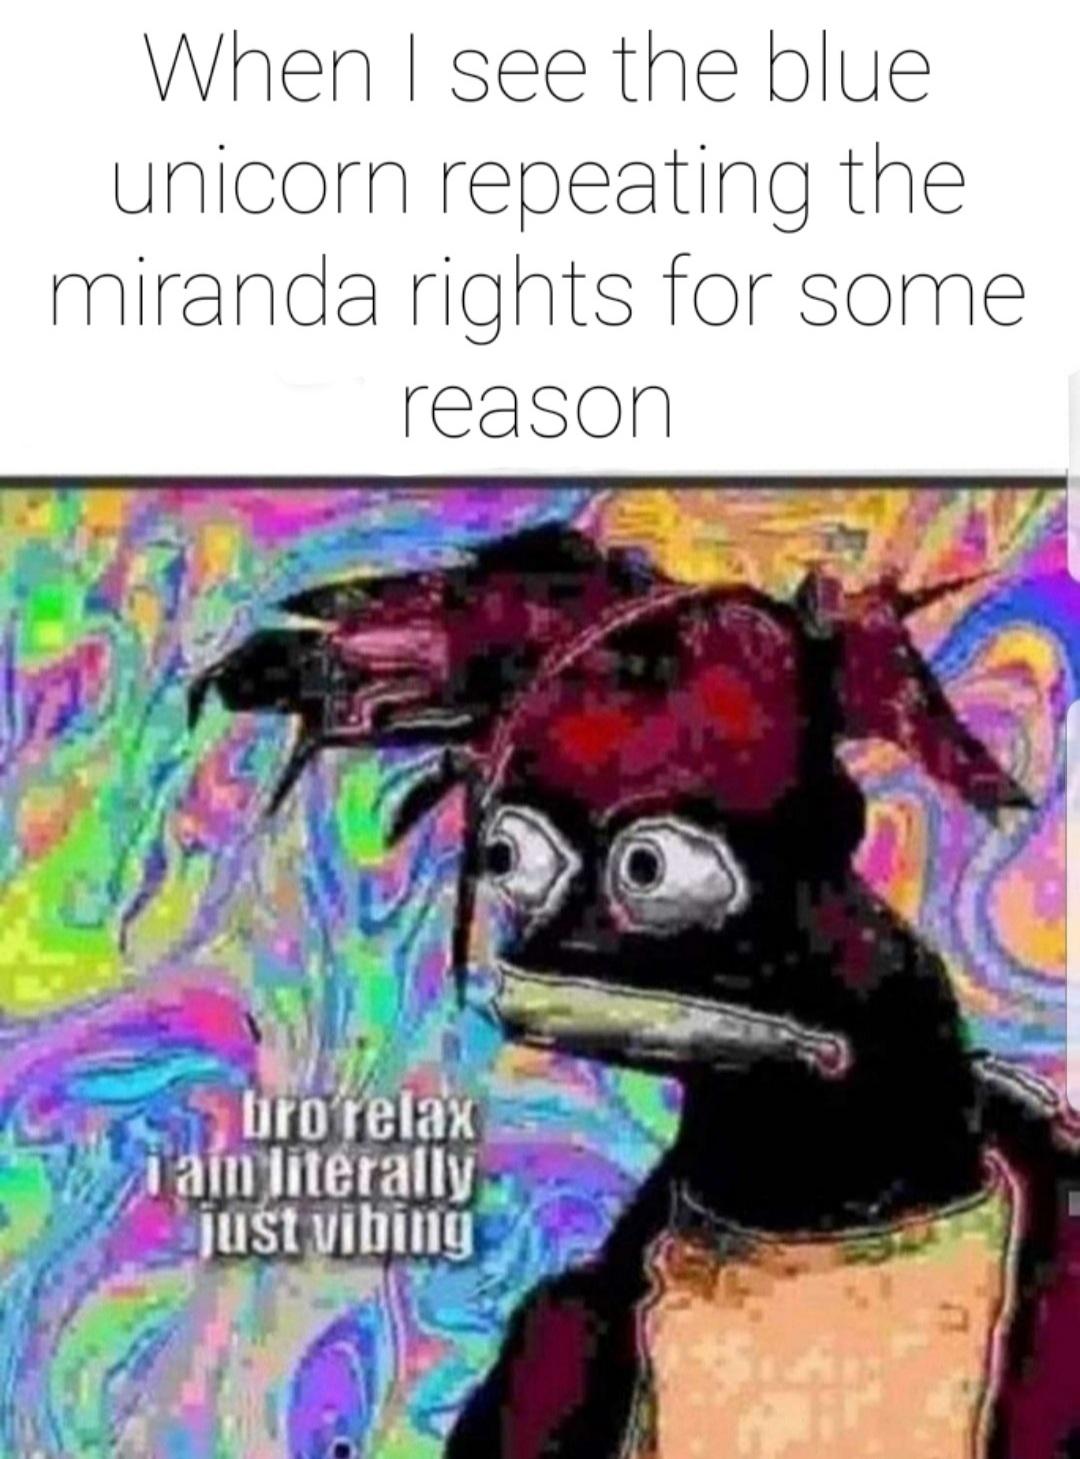 bro relax im literally just vibing - When I see the blue unicorn repeating the miranda rights for some reason bro relax i am literally just vibing